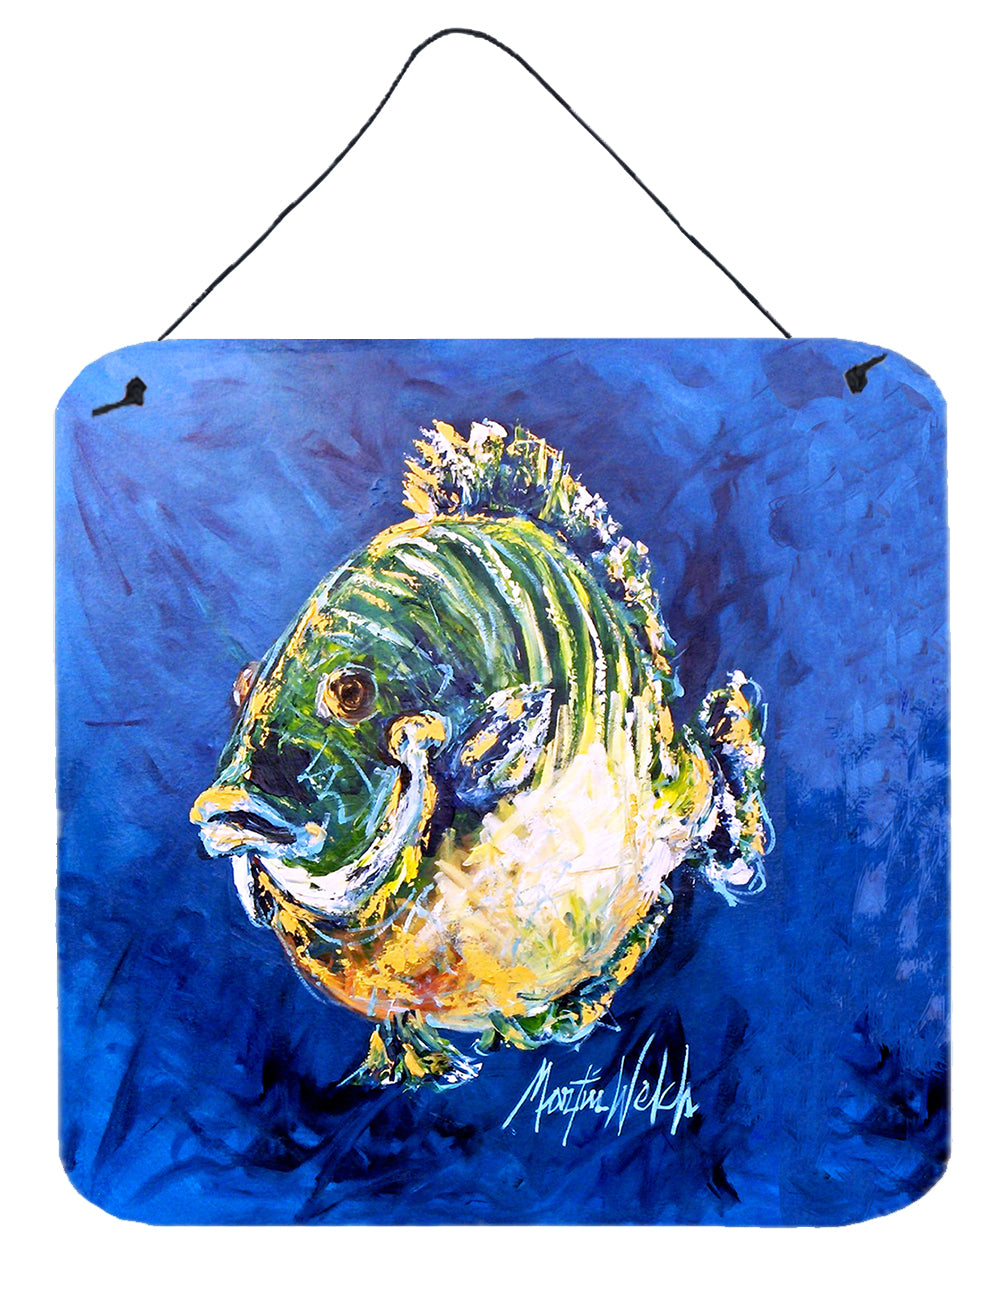 Buy this Blue Gill Wall or Door Hanging Prints